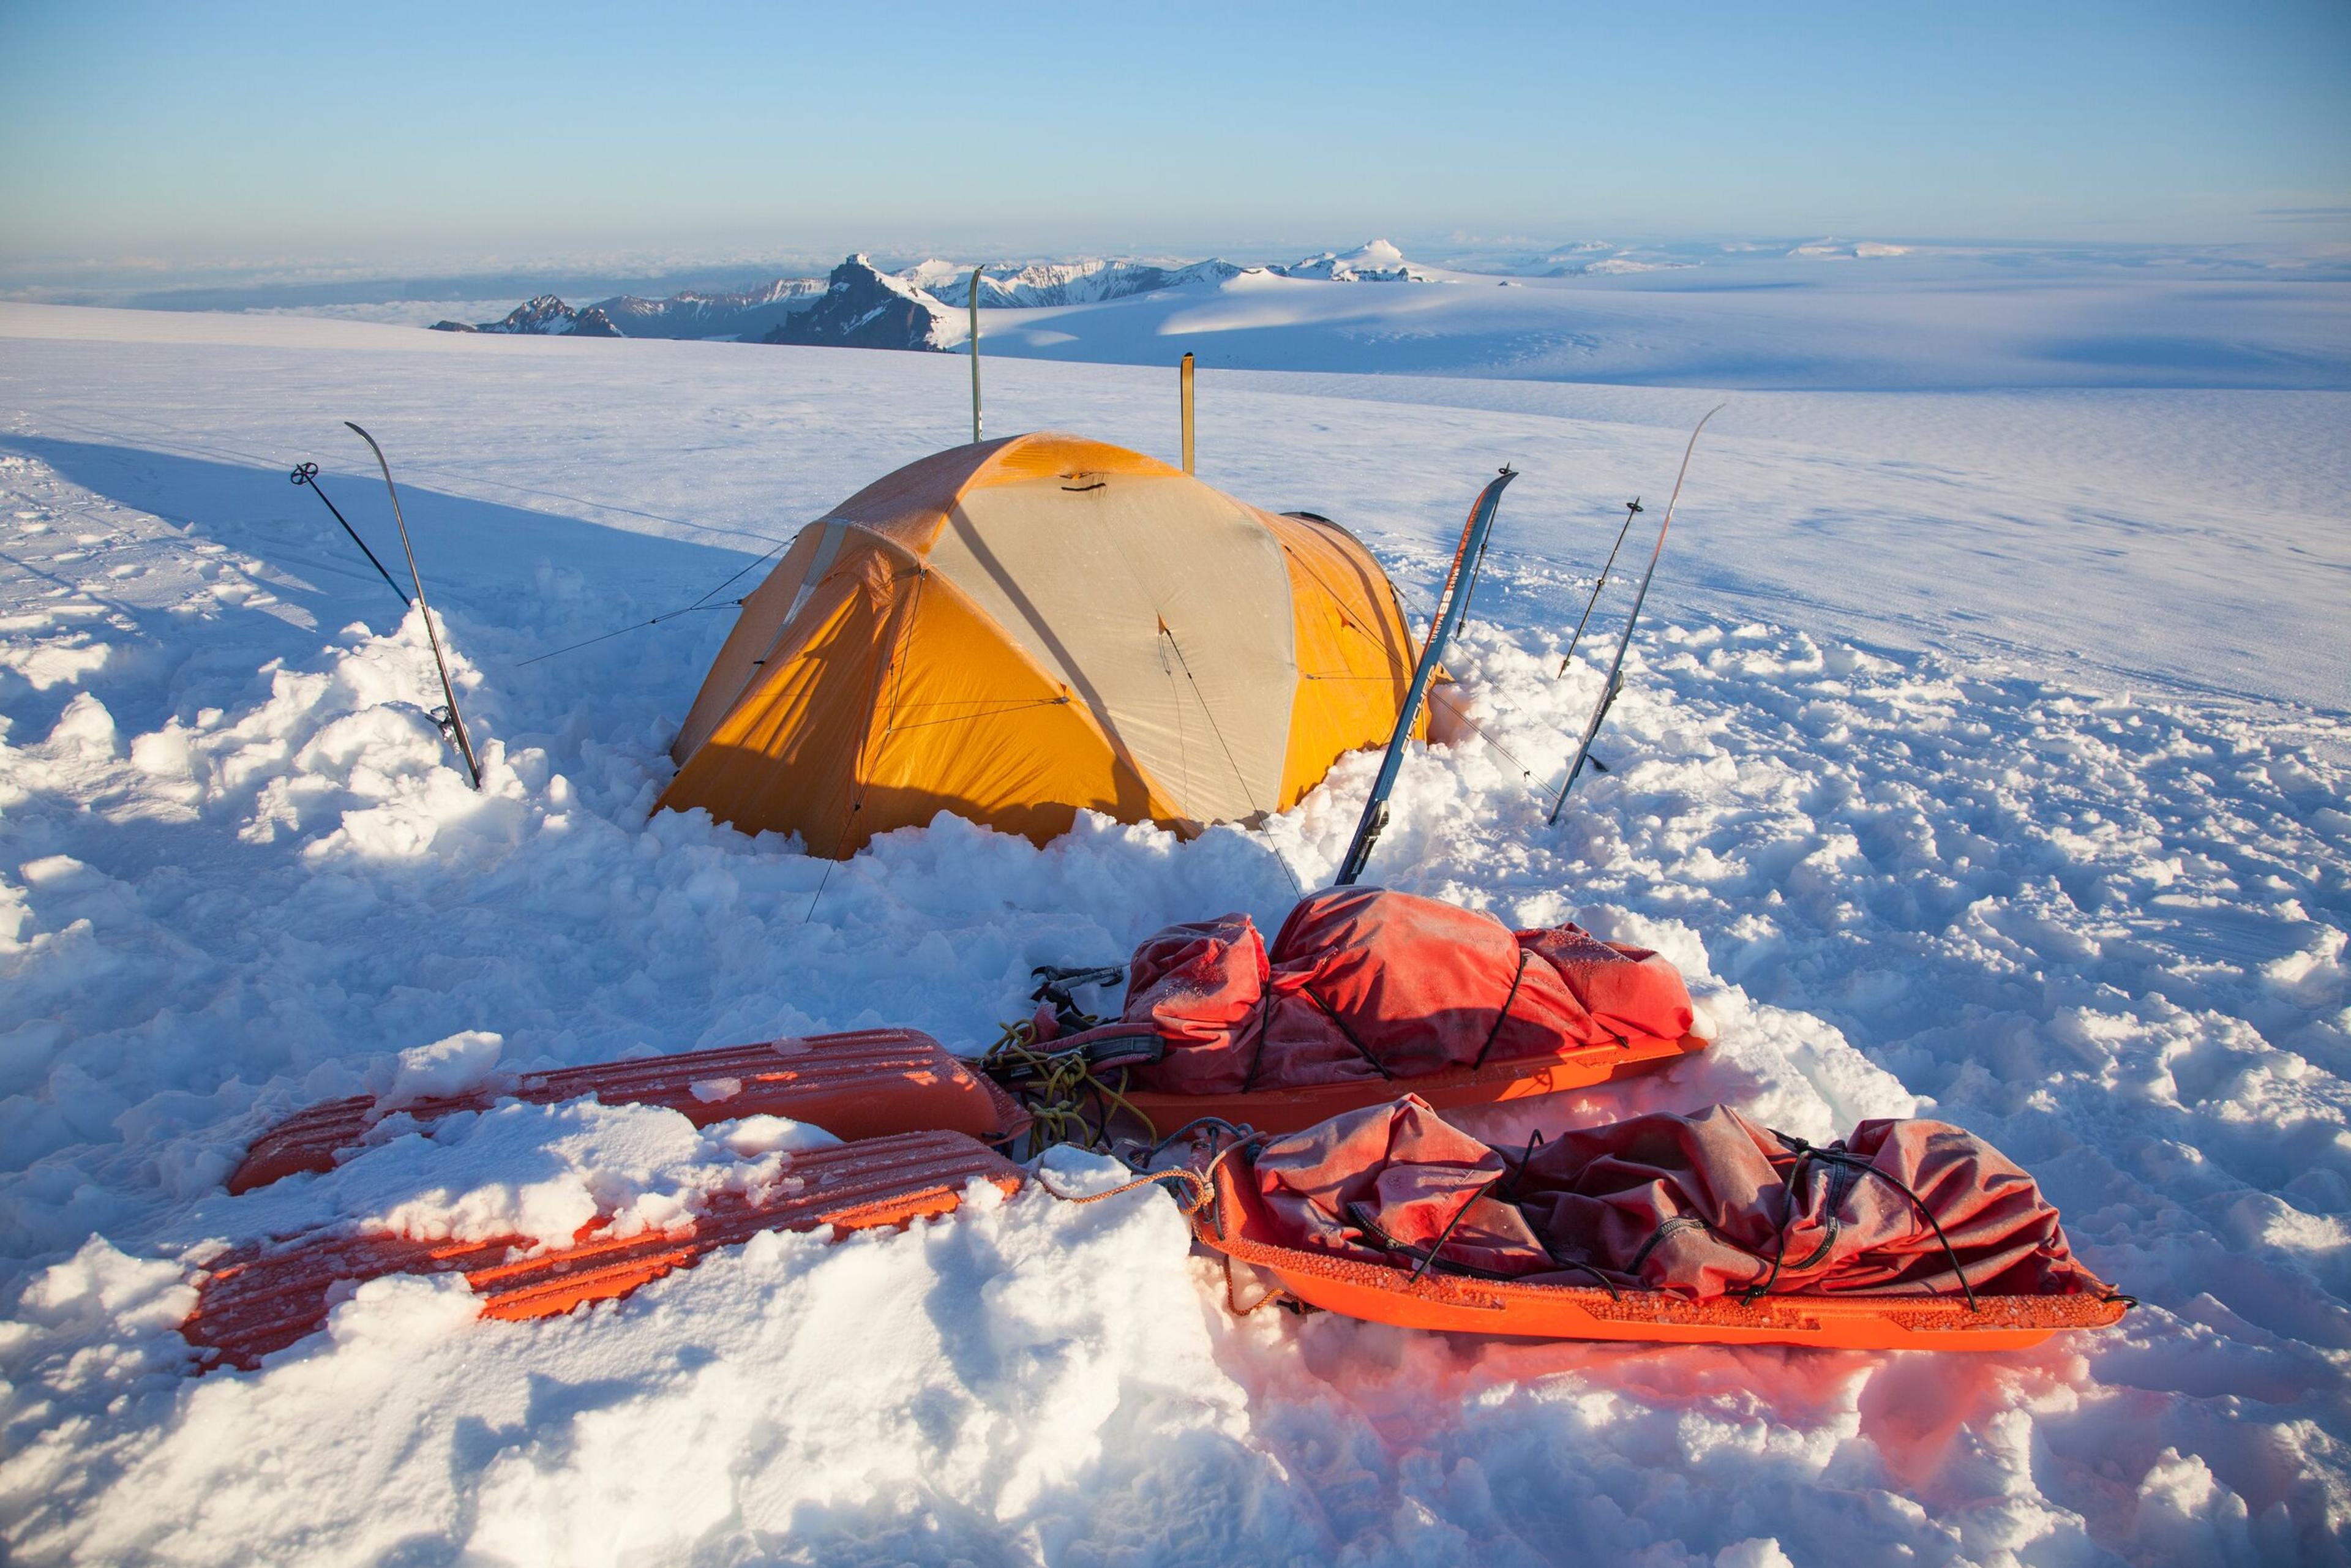 : A bright yellow tent stands pitched in a vast snowfield on a clear, sunny day, with skiing equipment in the foreground.